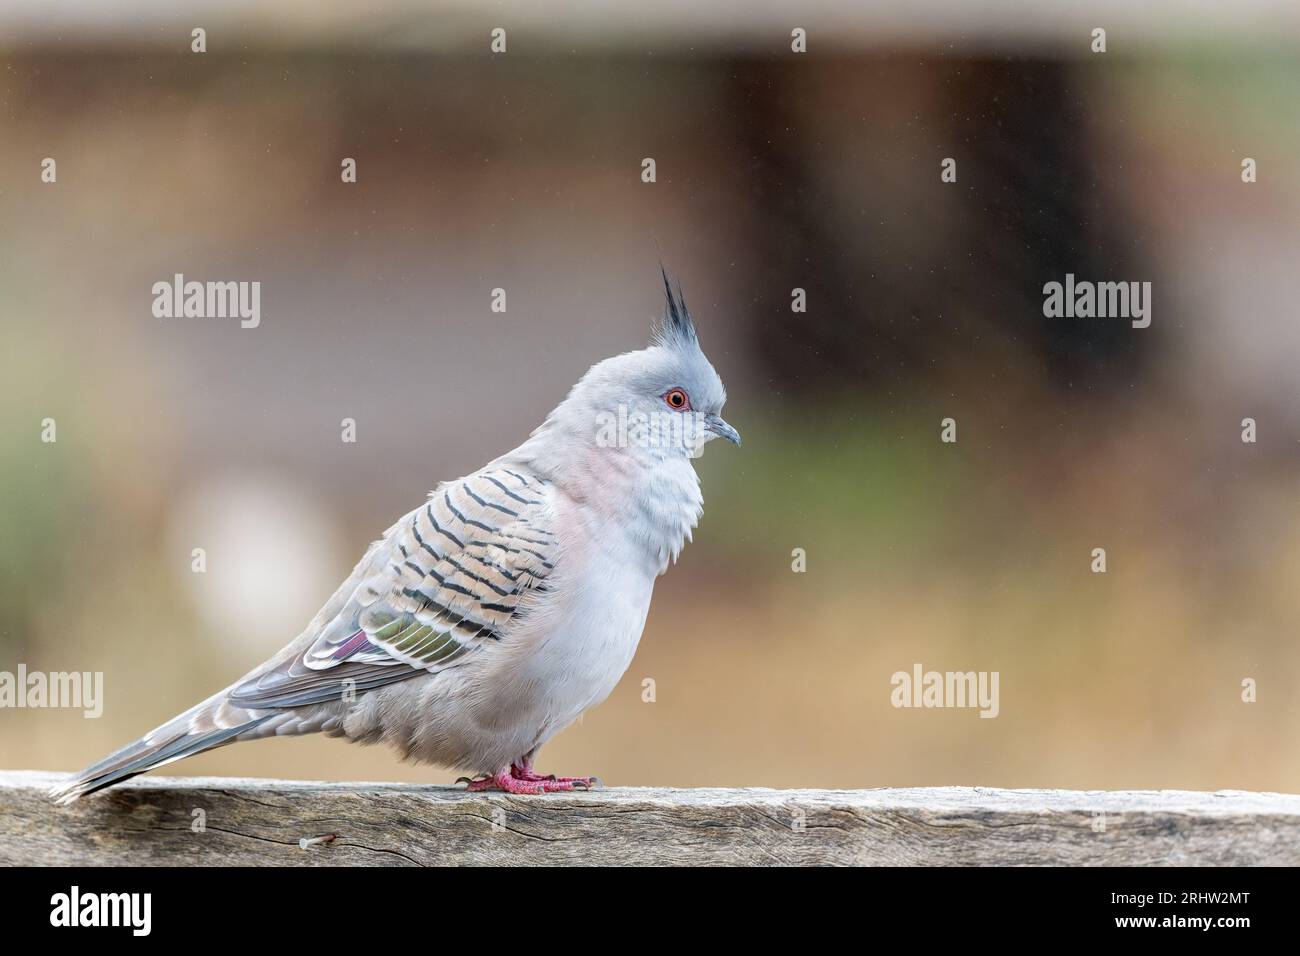 A solitary Crested Pigeon is perched, in profile, on an old wooden fence rail in the outback town of Bourke in New South Wales in Australia. Stock Photo